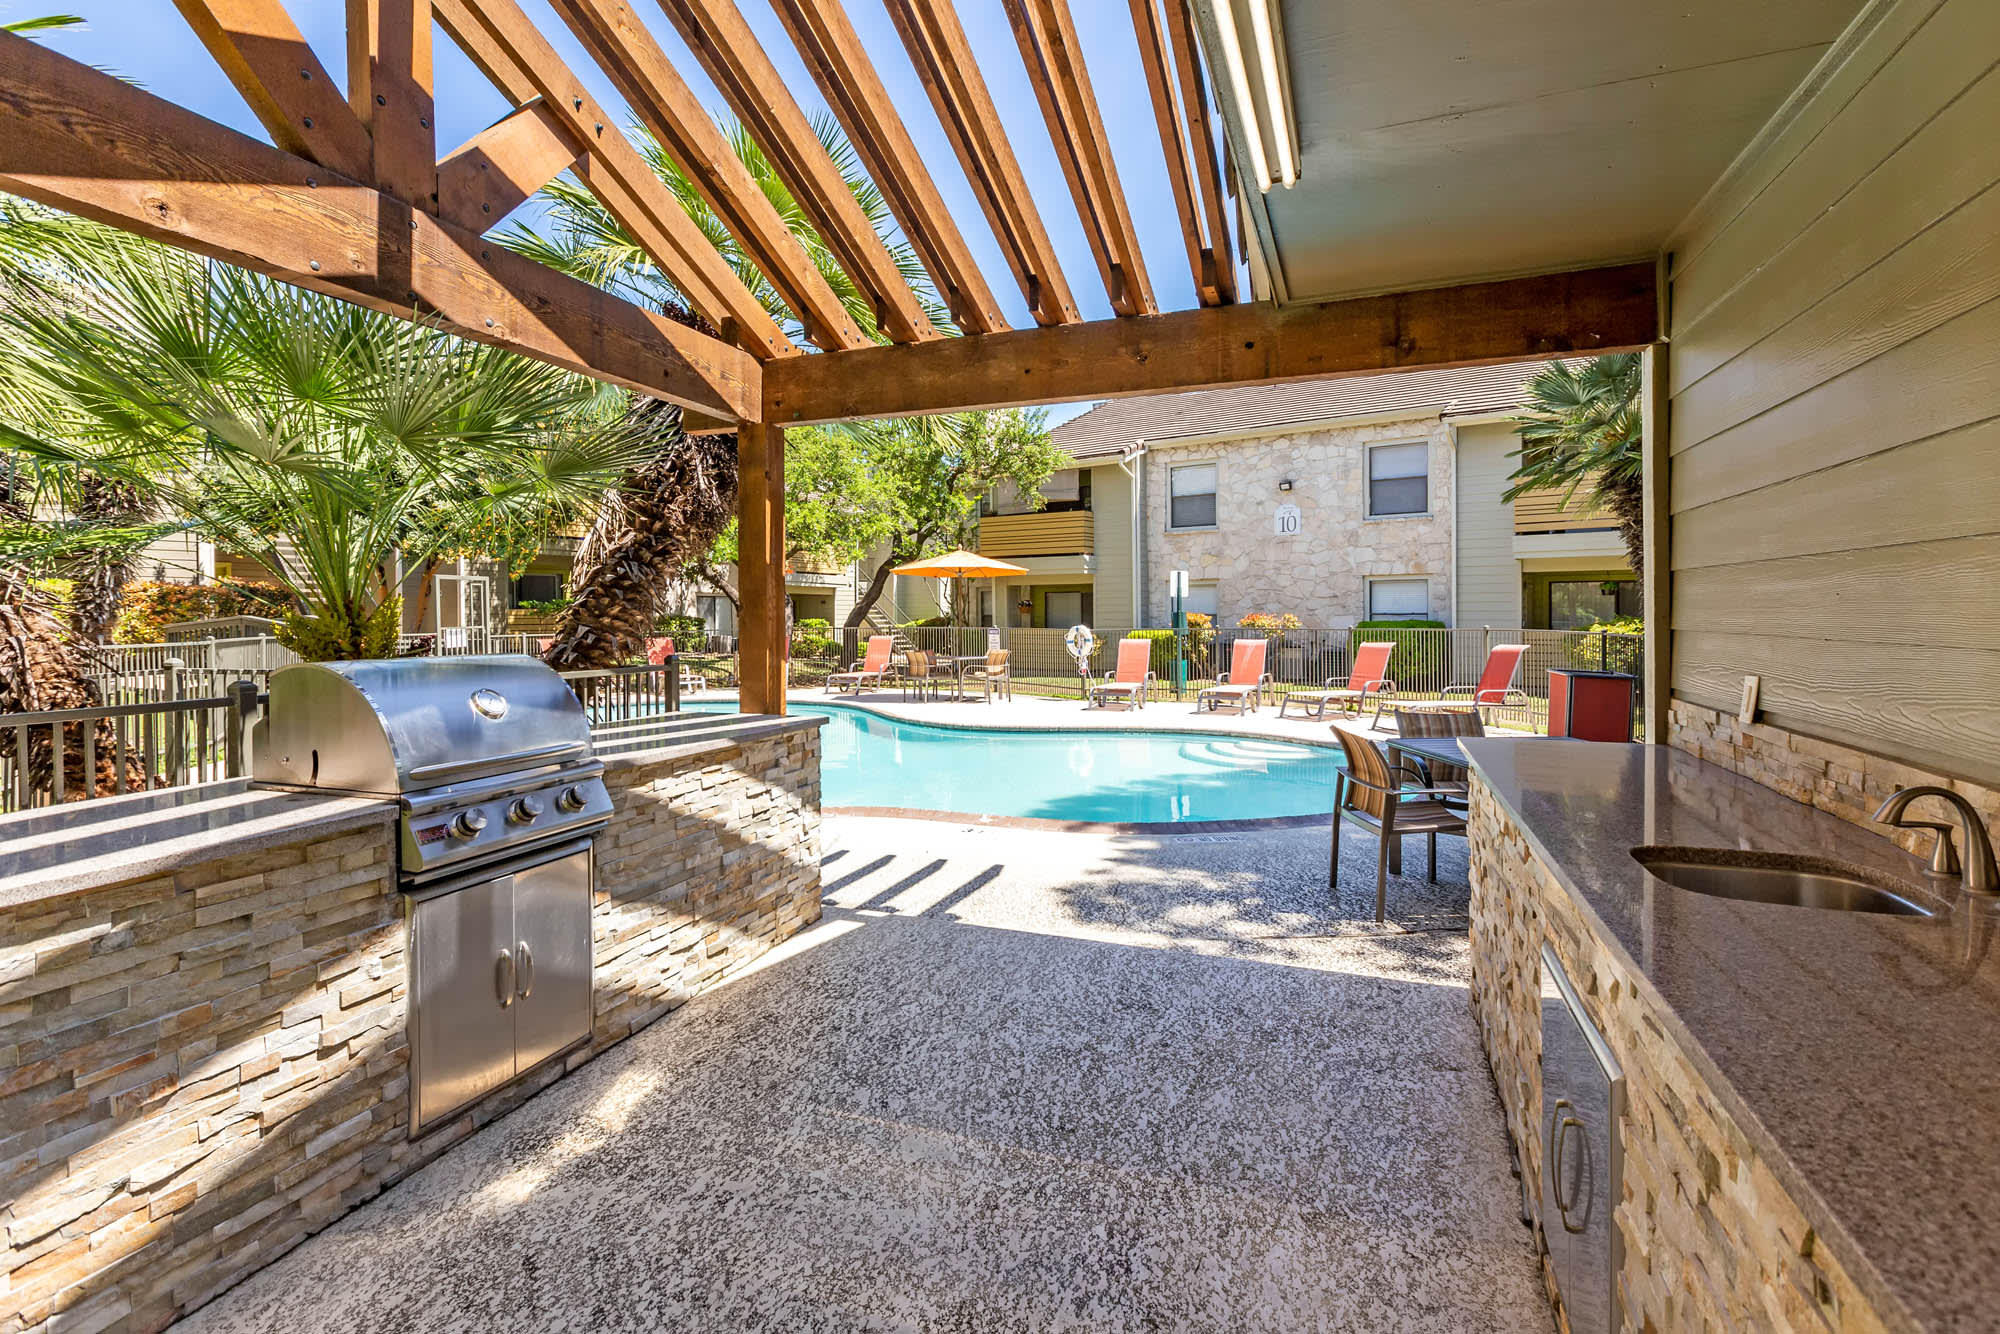 Outdoor Grill With Intimate Seating Area